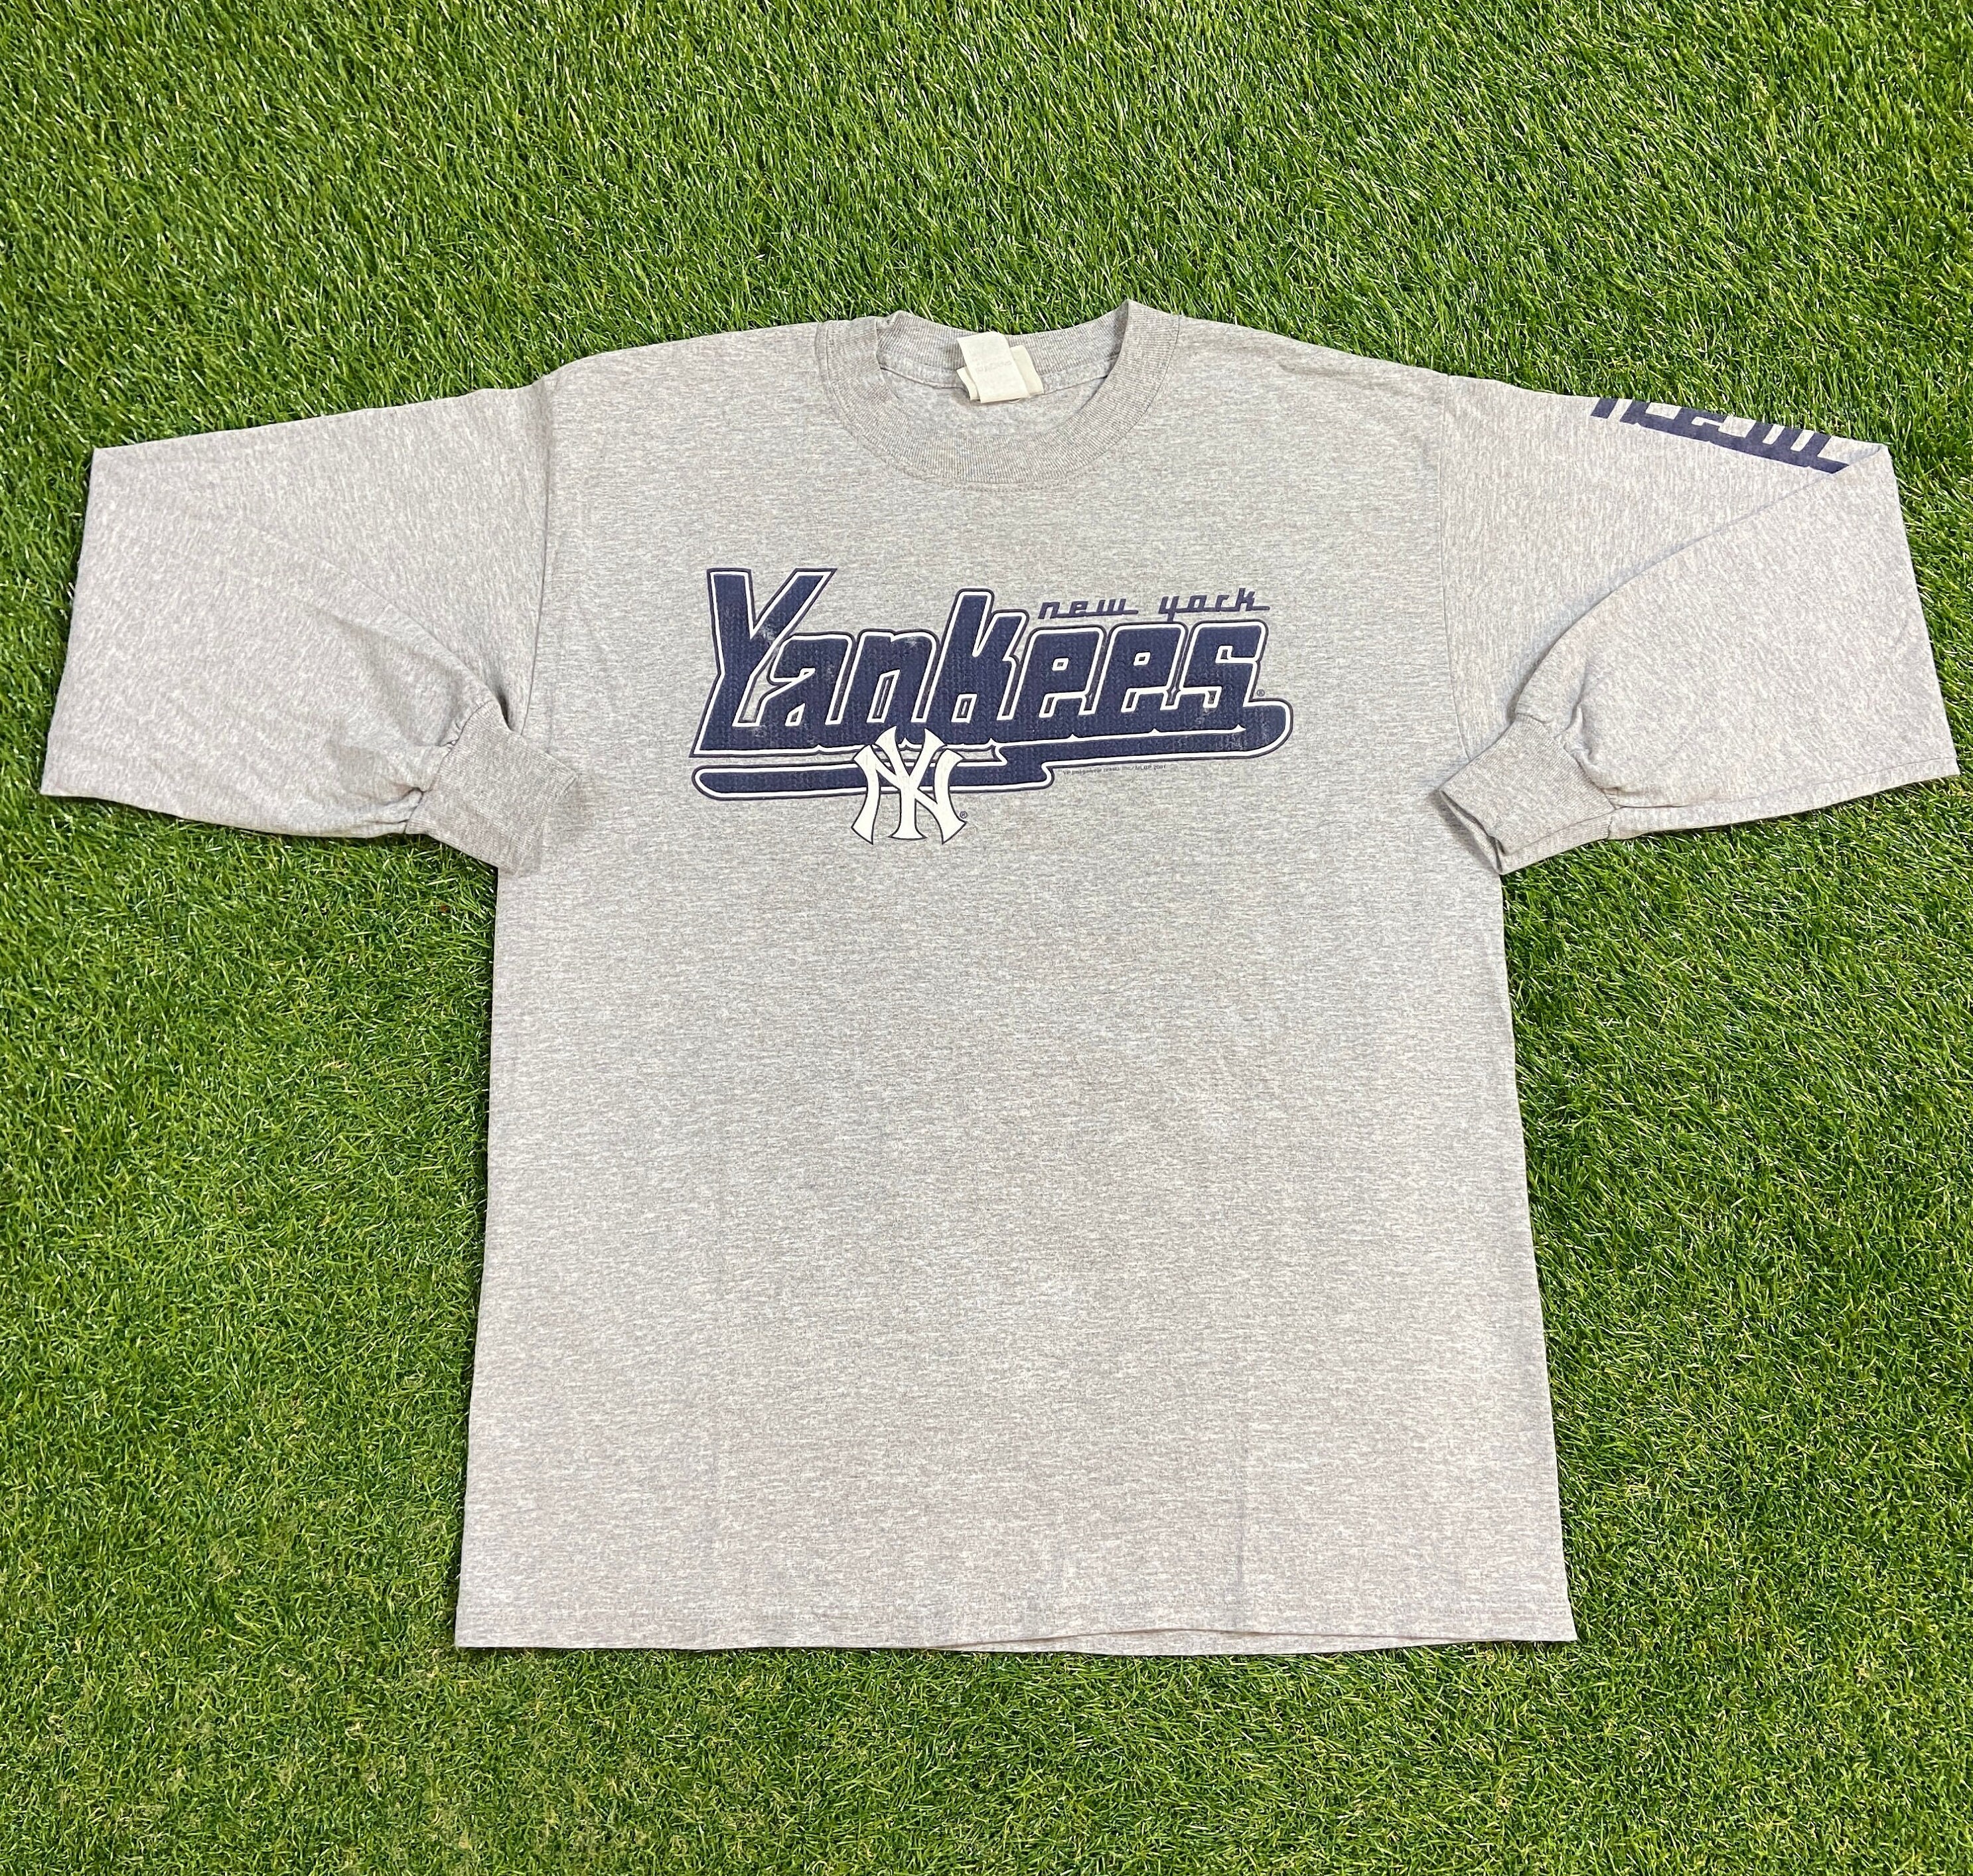 Derek Jeter t-shirt with logo and all-over printed picture - T-shirts with  all kind of auto, moto, cartoons and music themes